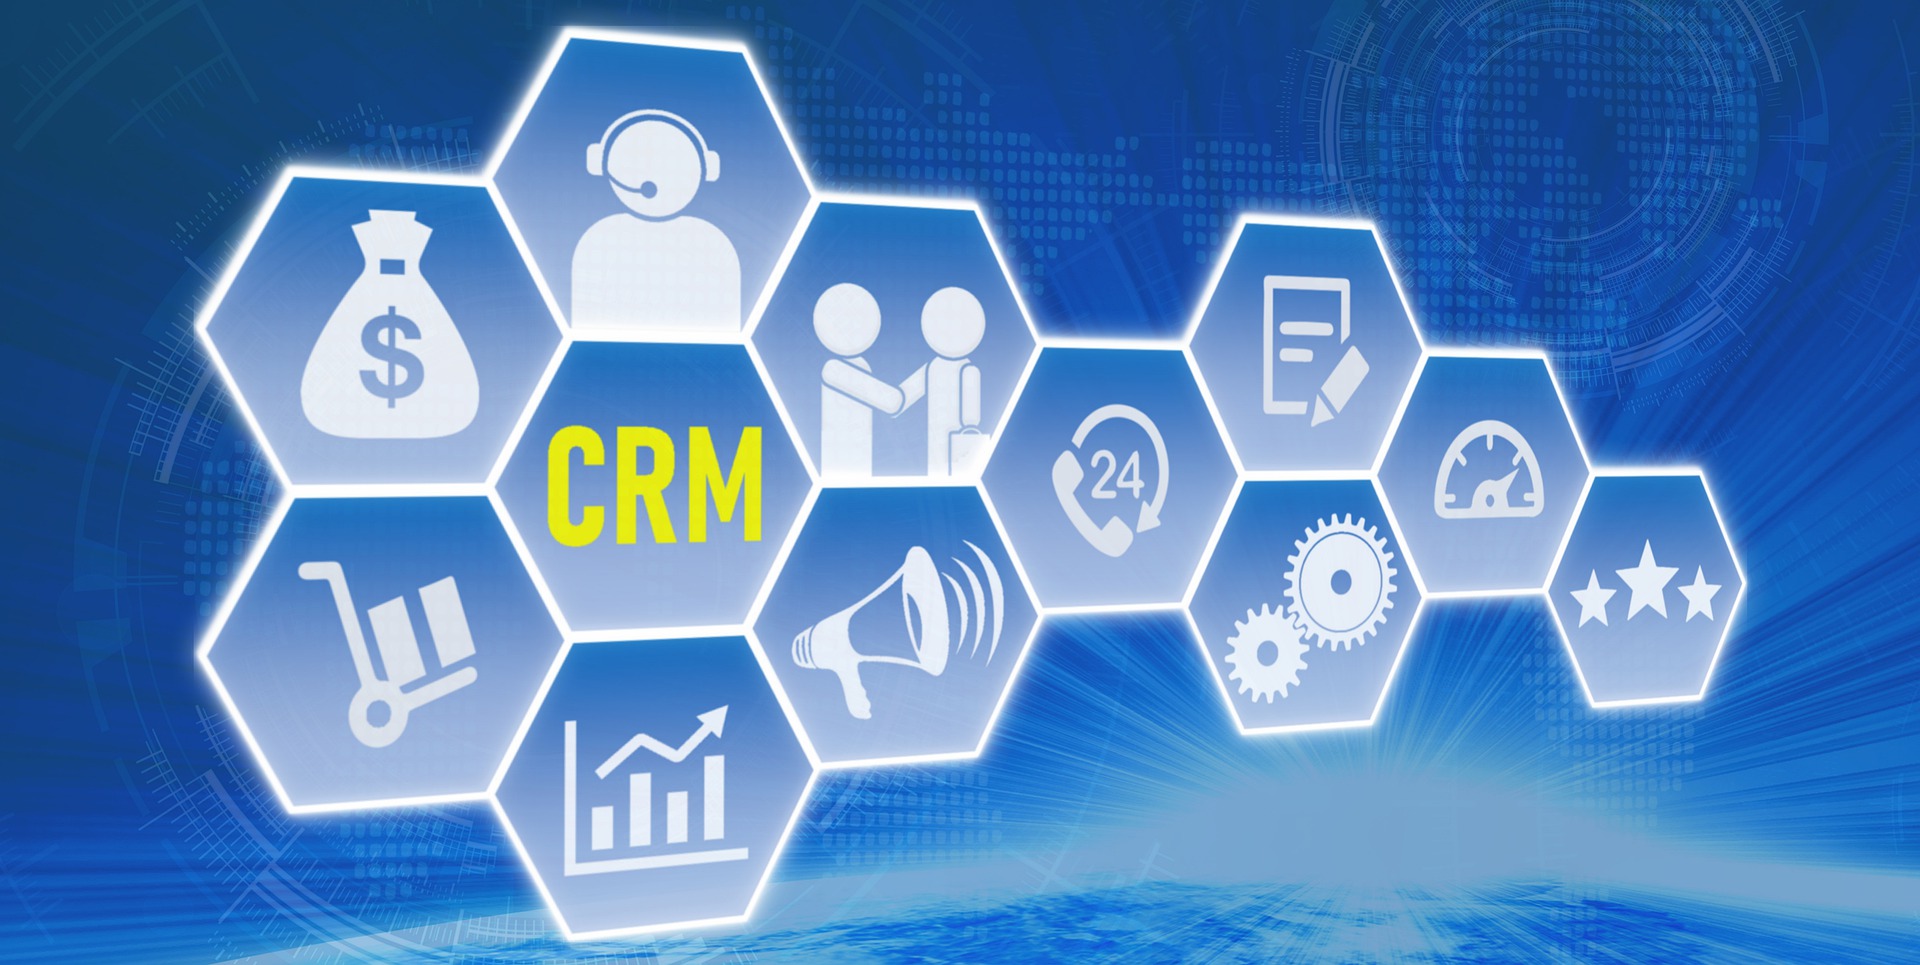 What is a bad CRM